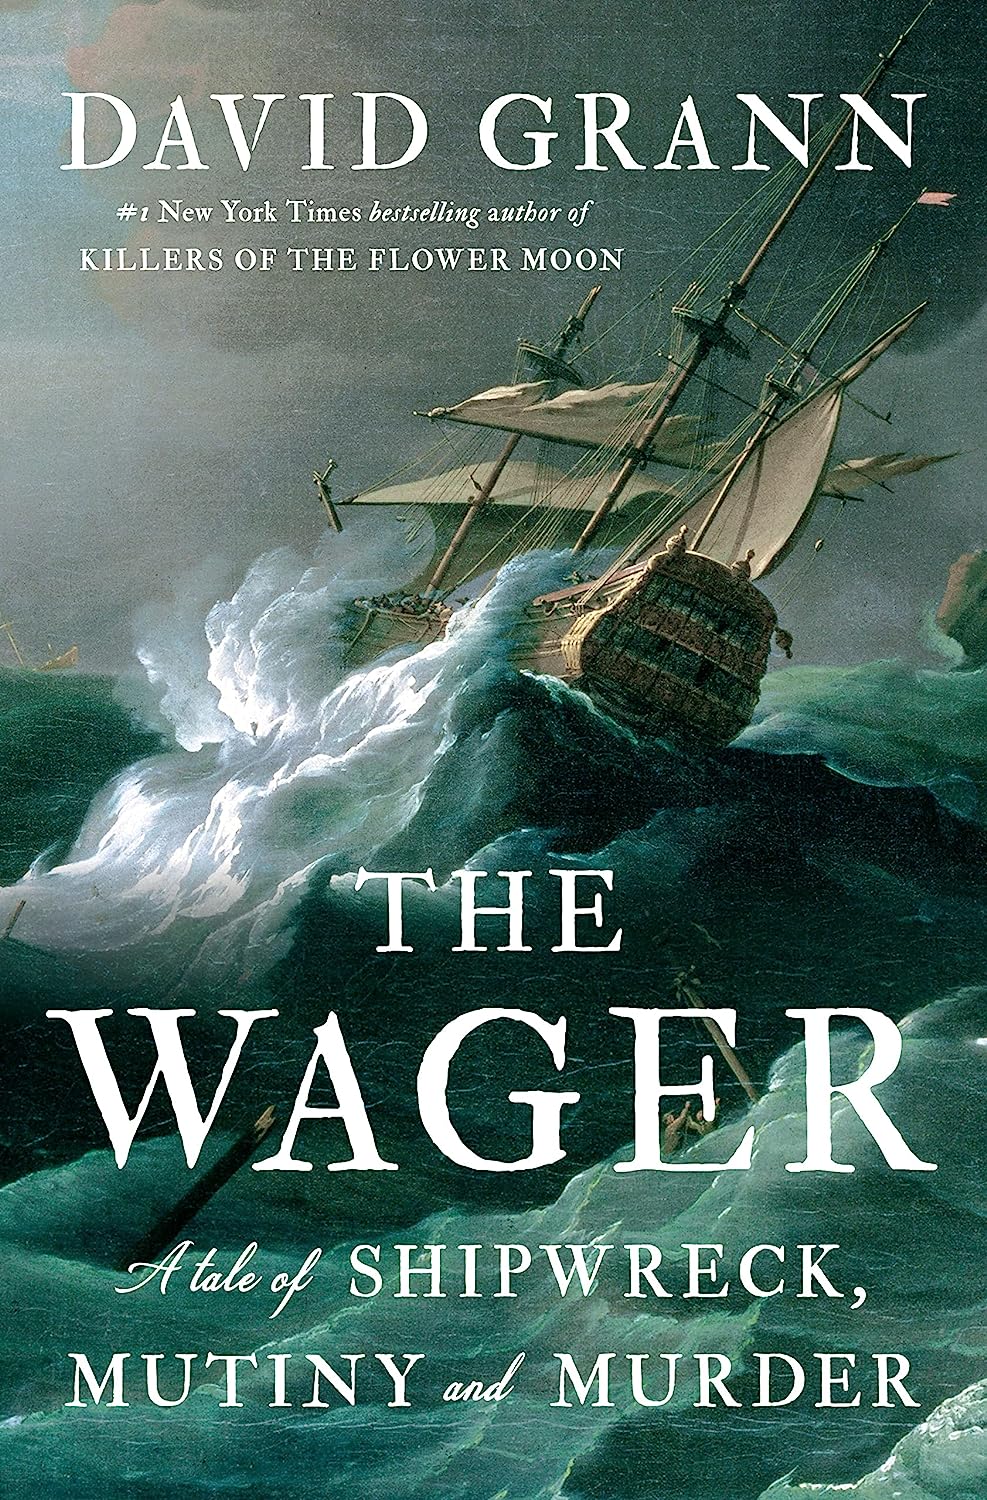 Cover of "The Wager" by David Grann